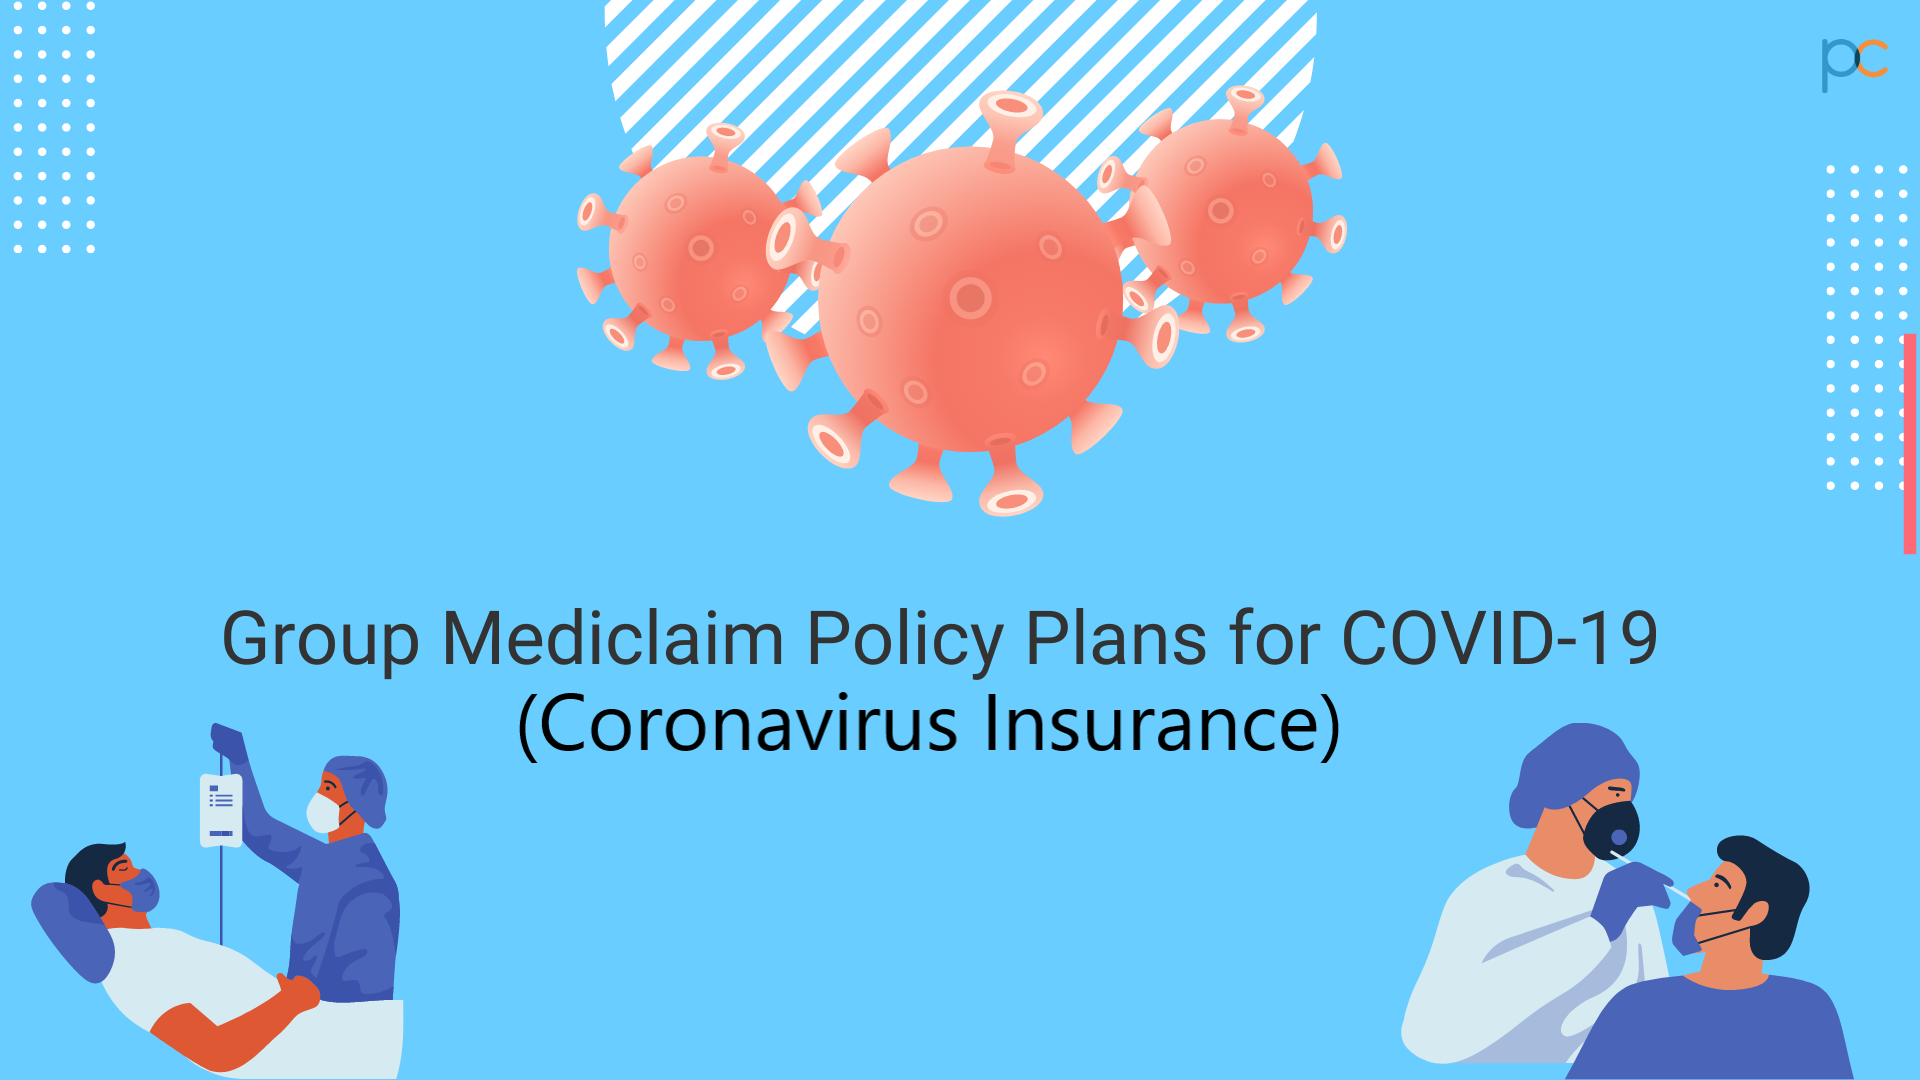 Group Mediclaim Policy Plans for COVID-19 – Coronavirus Insurance - Plancover